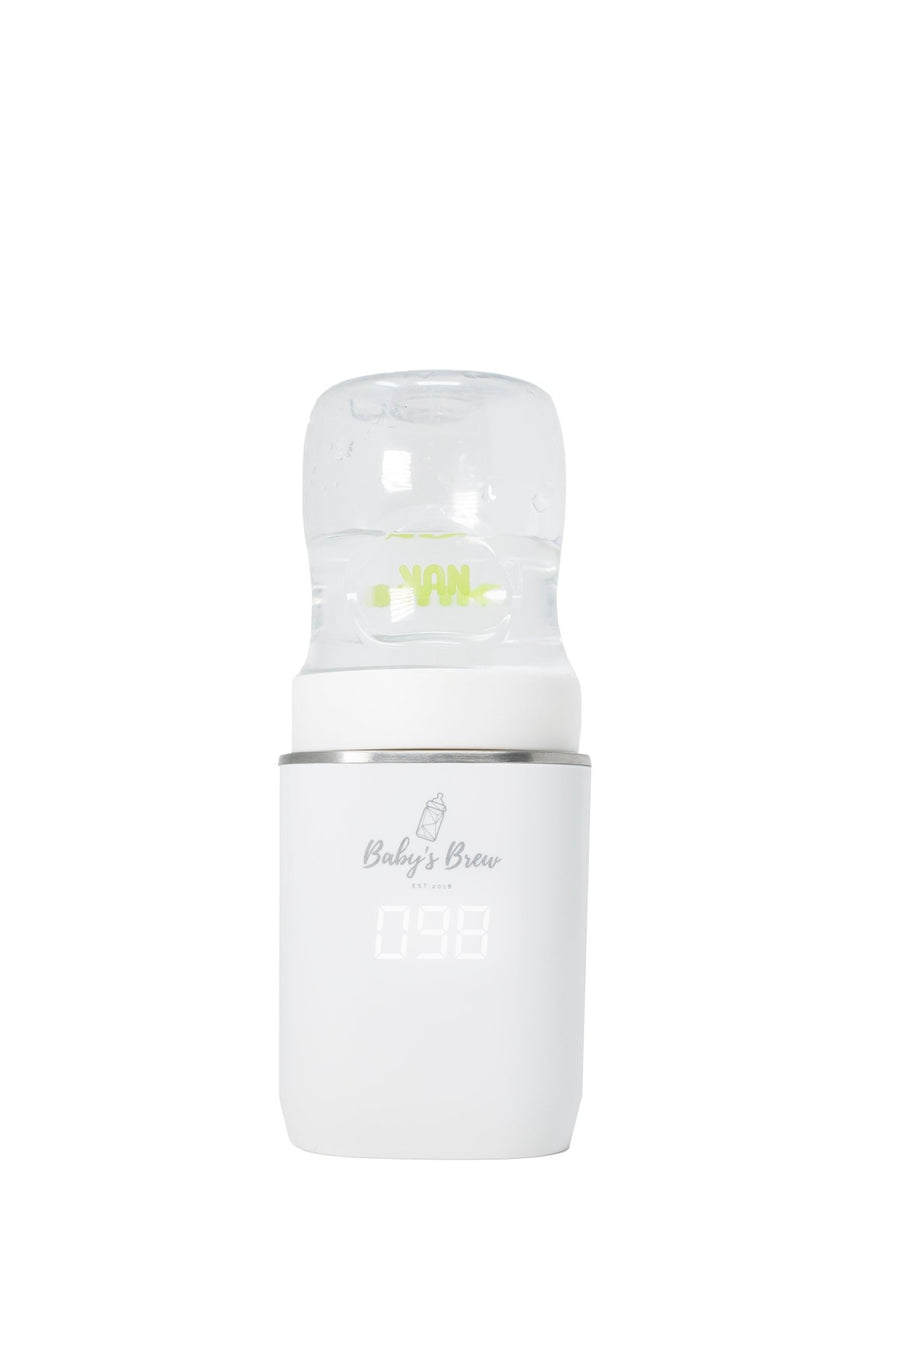 NUK Simply Natural Bottle Adapter - The Baby's Brew